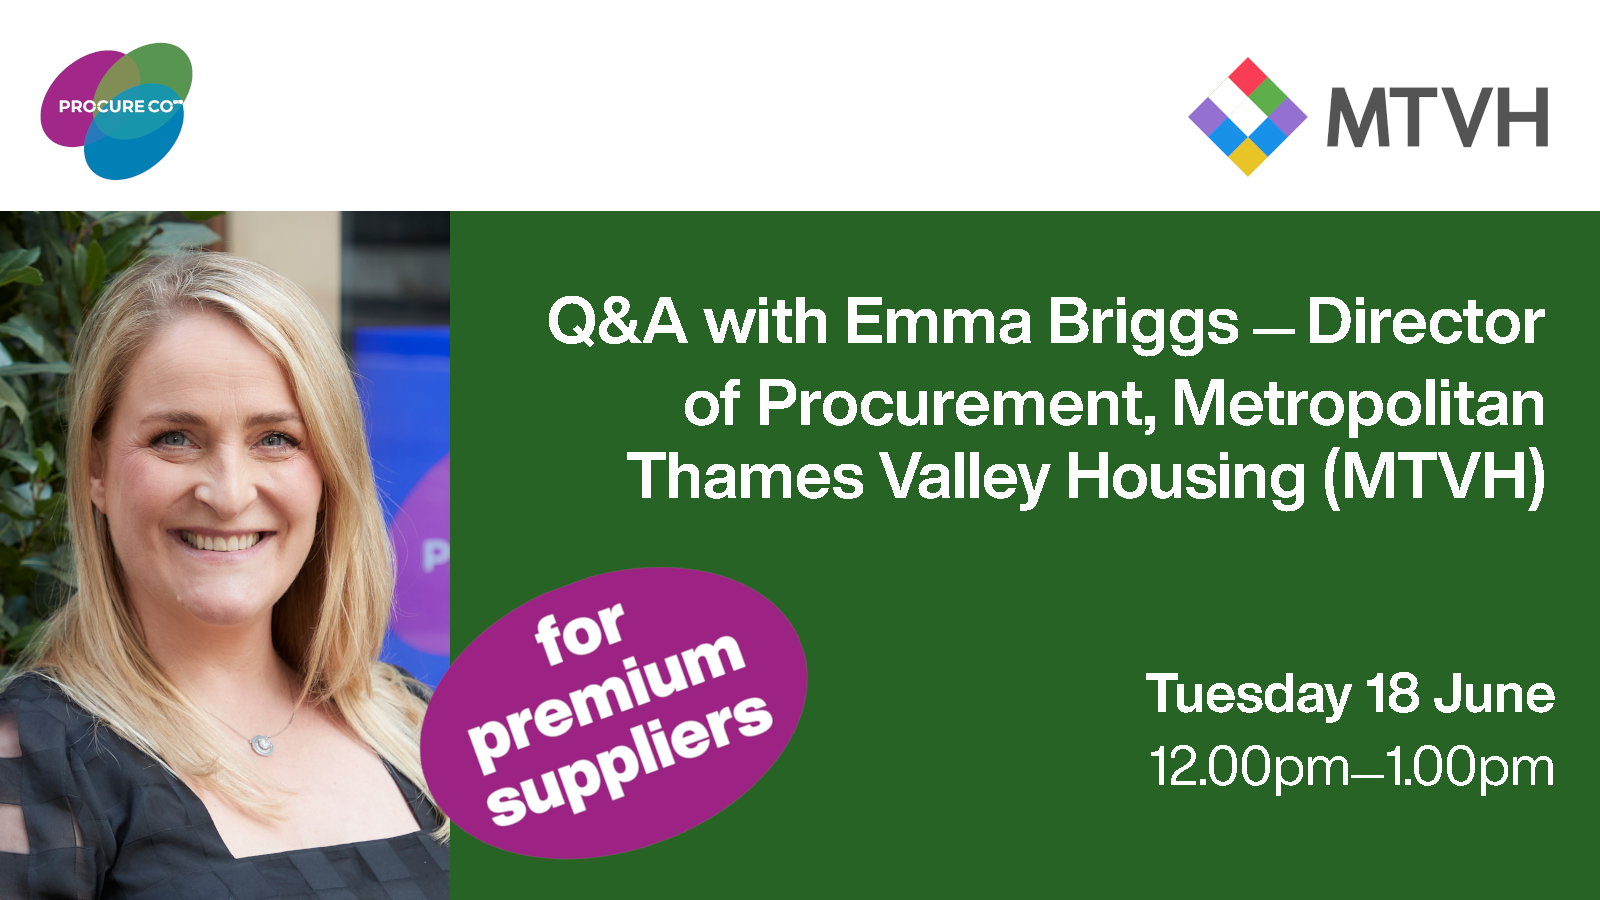 Q&A with Emma Briggs, Director of Procurement, Metropolitan Thames Valley Housing (MTVH)